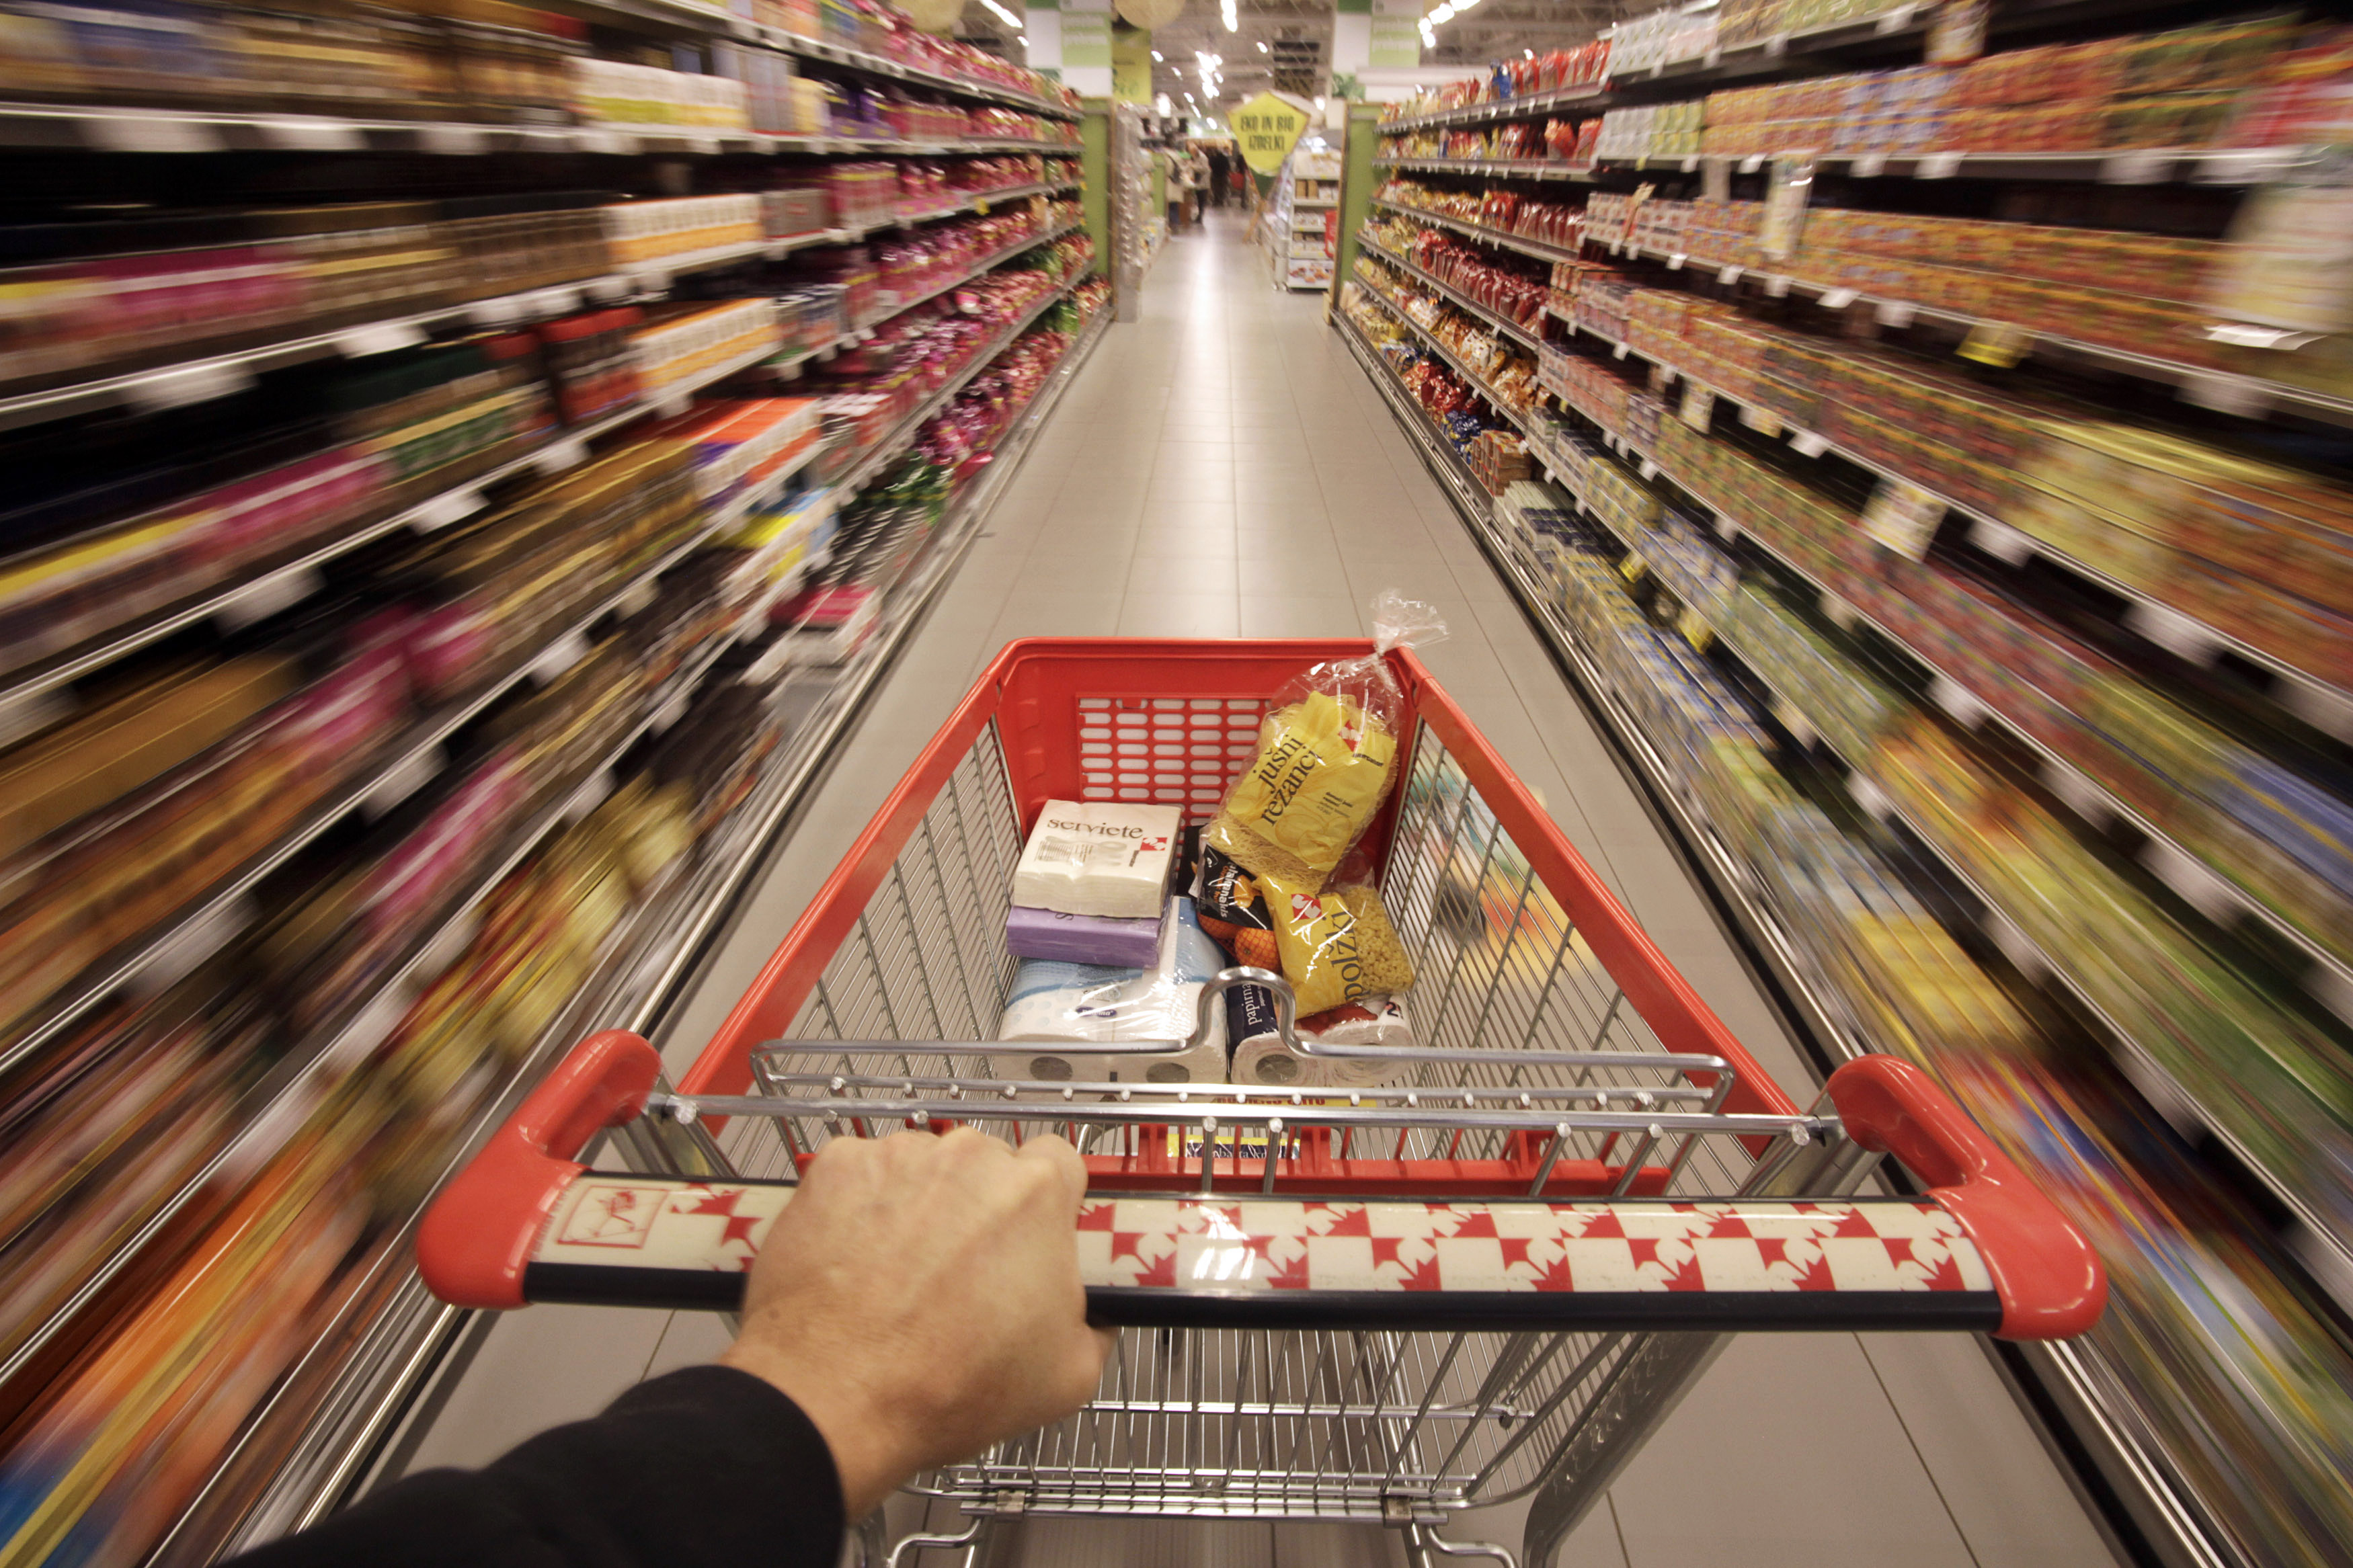 a shopping cart is pushed down the aisle in this reuters photo illustration